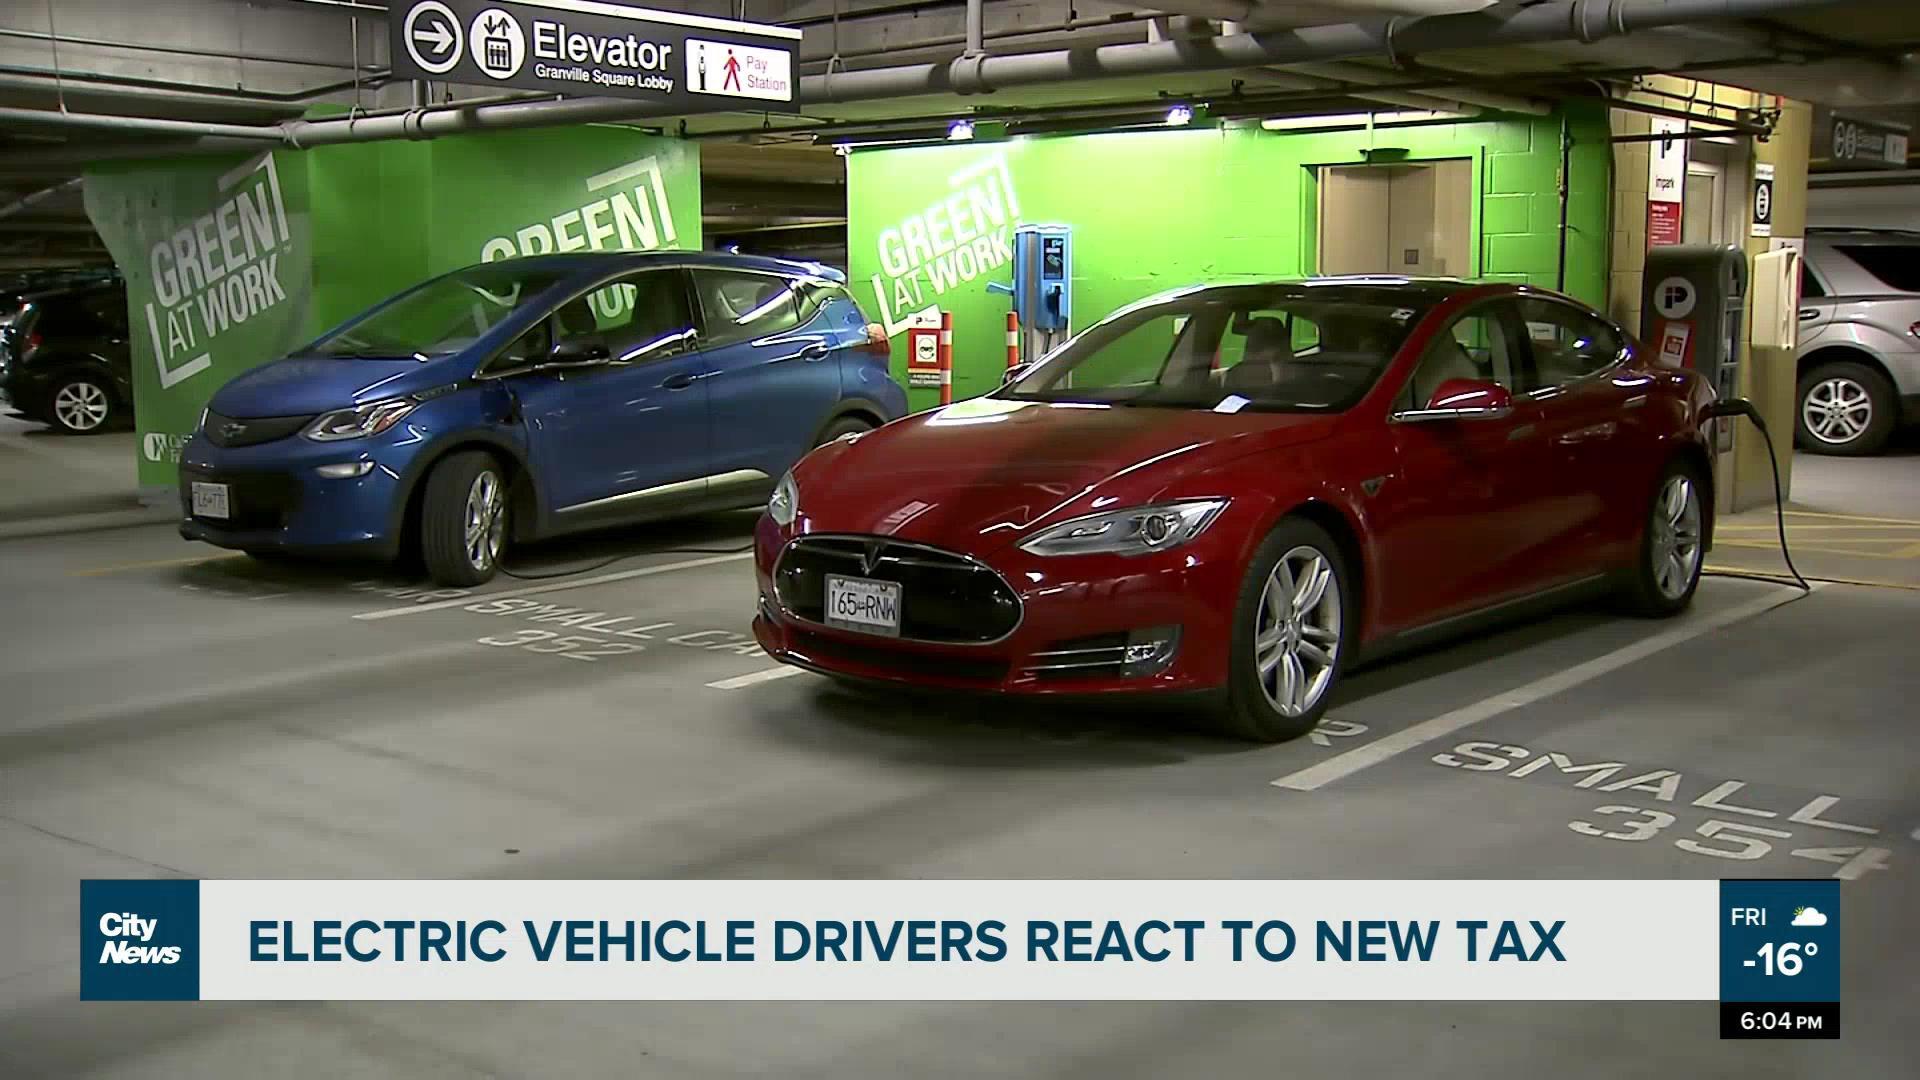 Electric vehicle drivers react to new tax